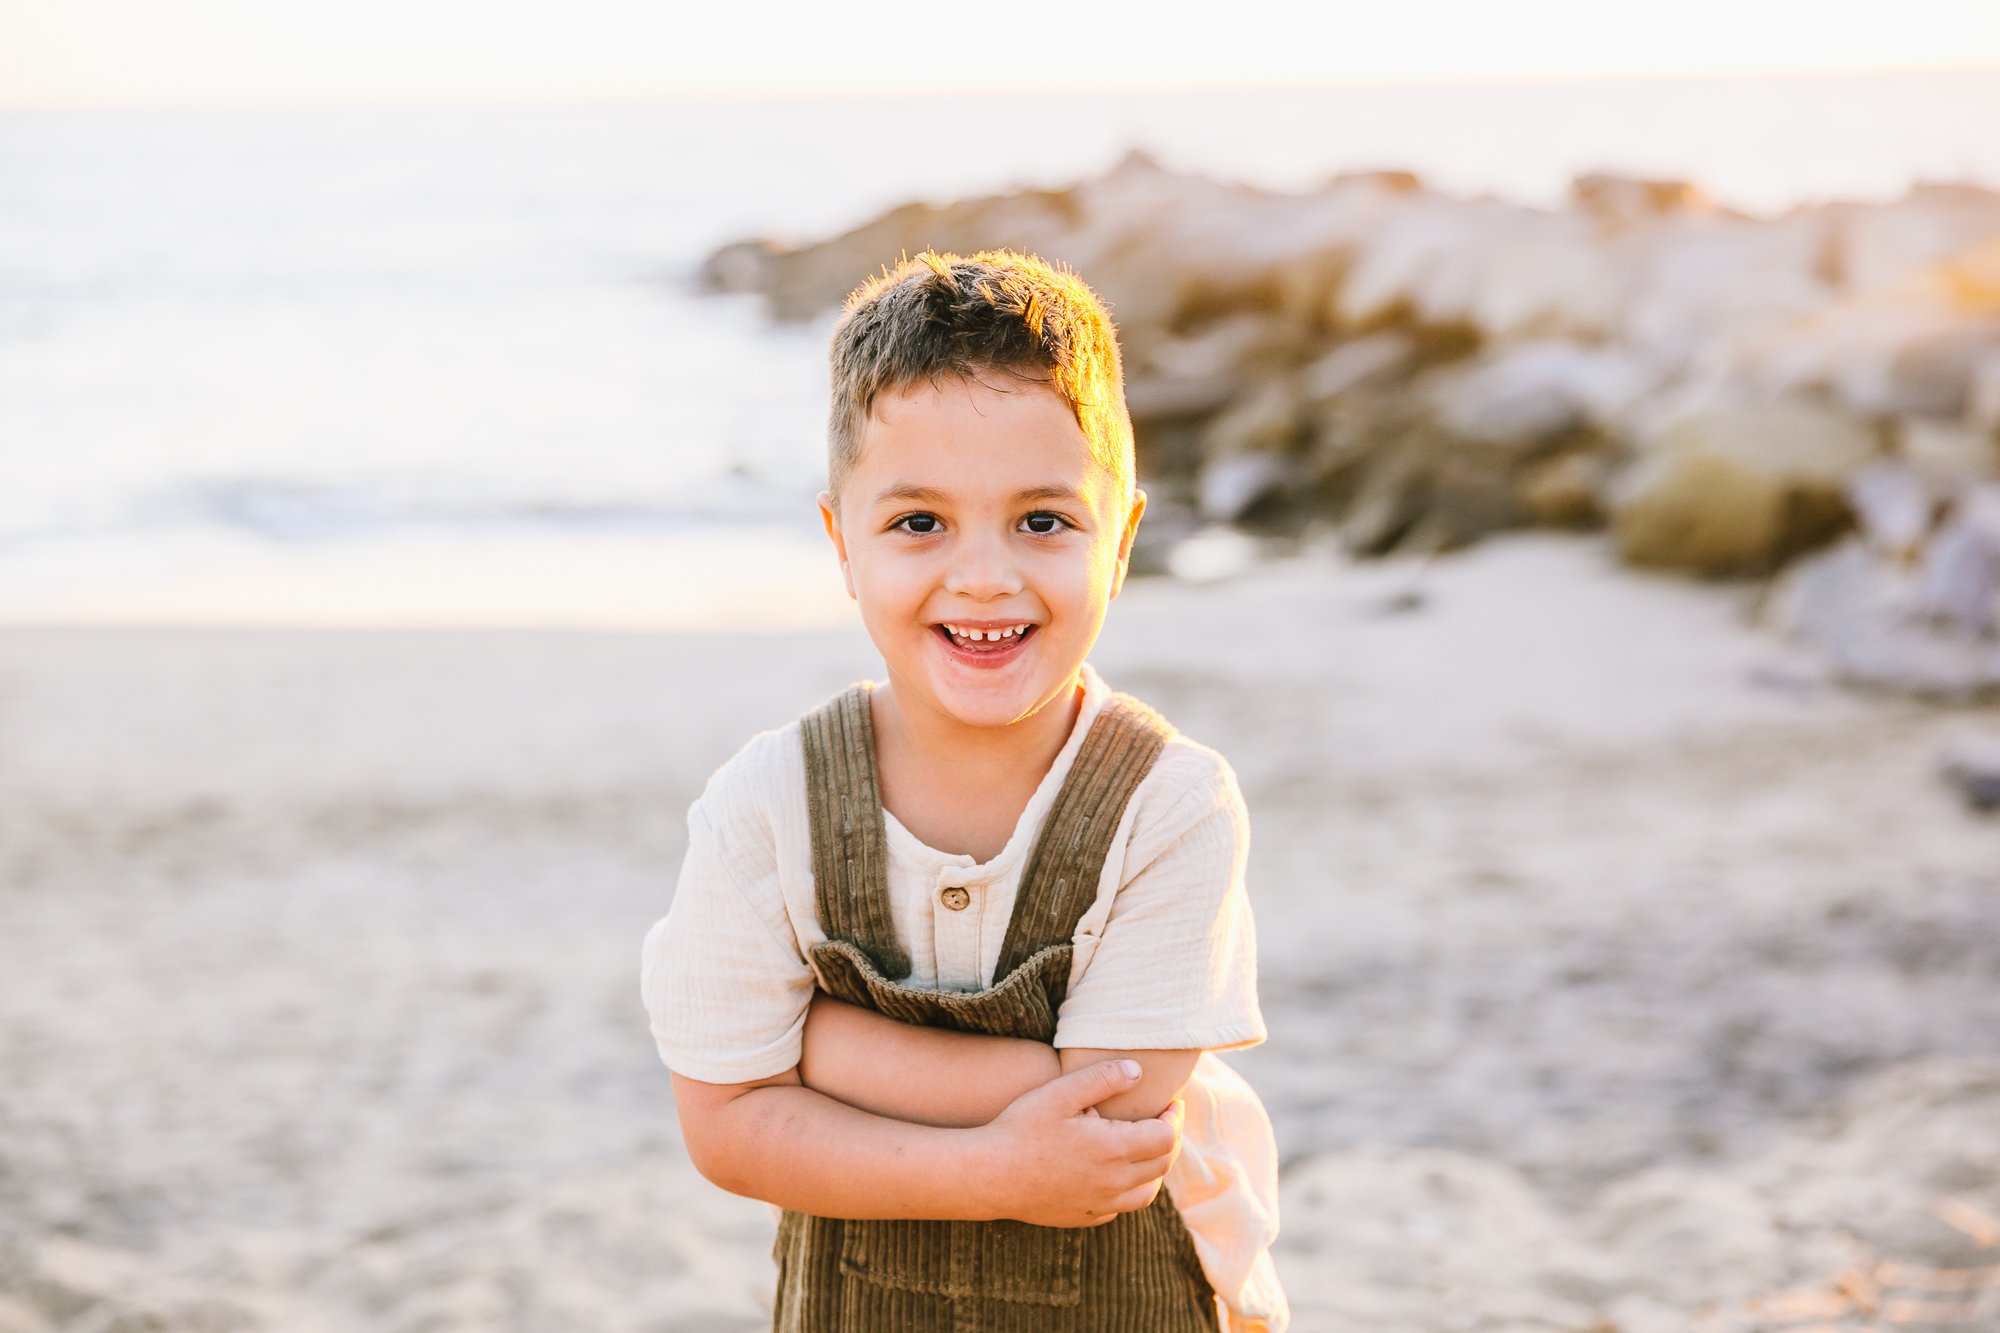 Los_Angeles_Family_Photographer_Mini_session_Golden_hour_Beach_Kid_Maternity_baby_Children_Holiday_Photography-2563.jpg